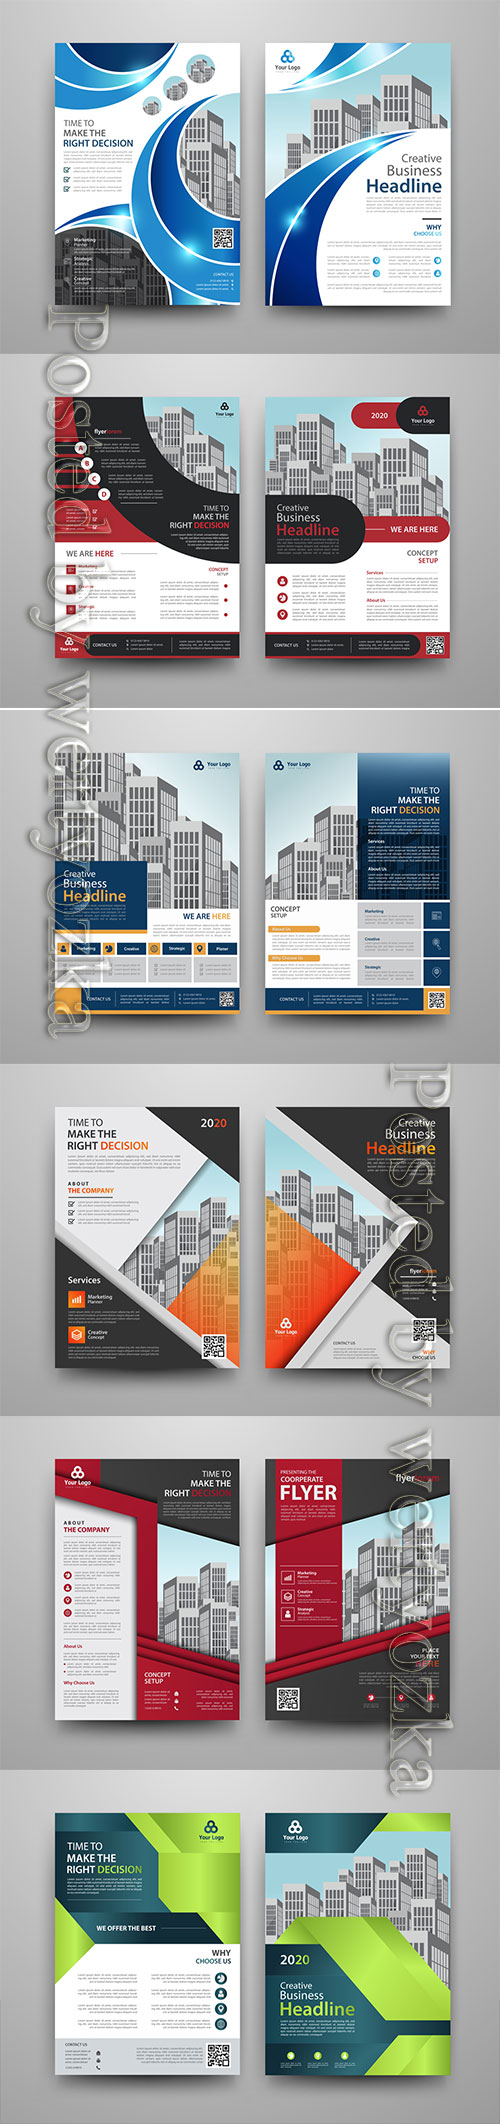 Business vector template for brochure, annual report, magazine # 15